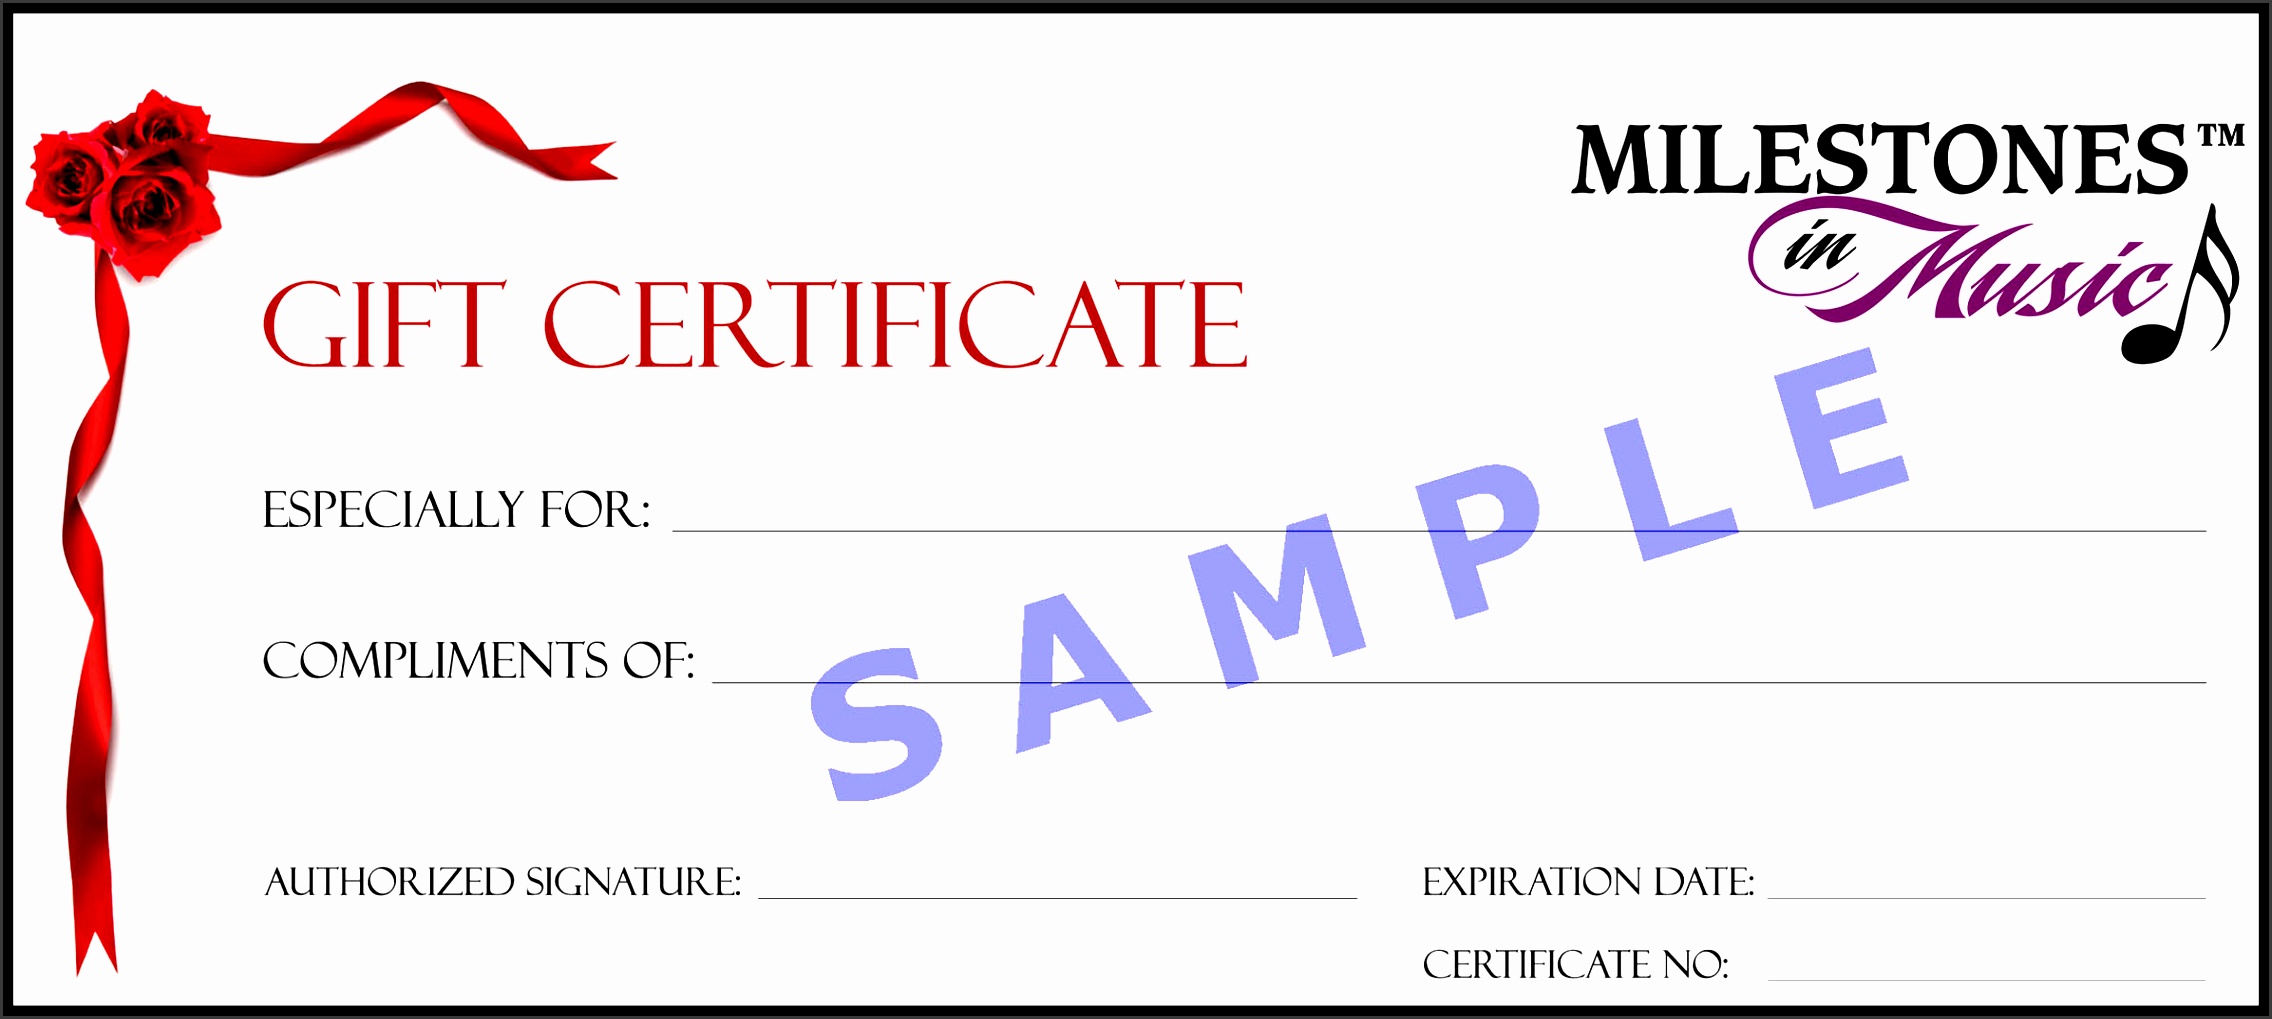 best ideas of t certificates in templates for t vouchers